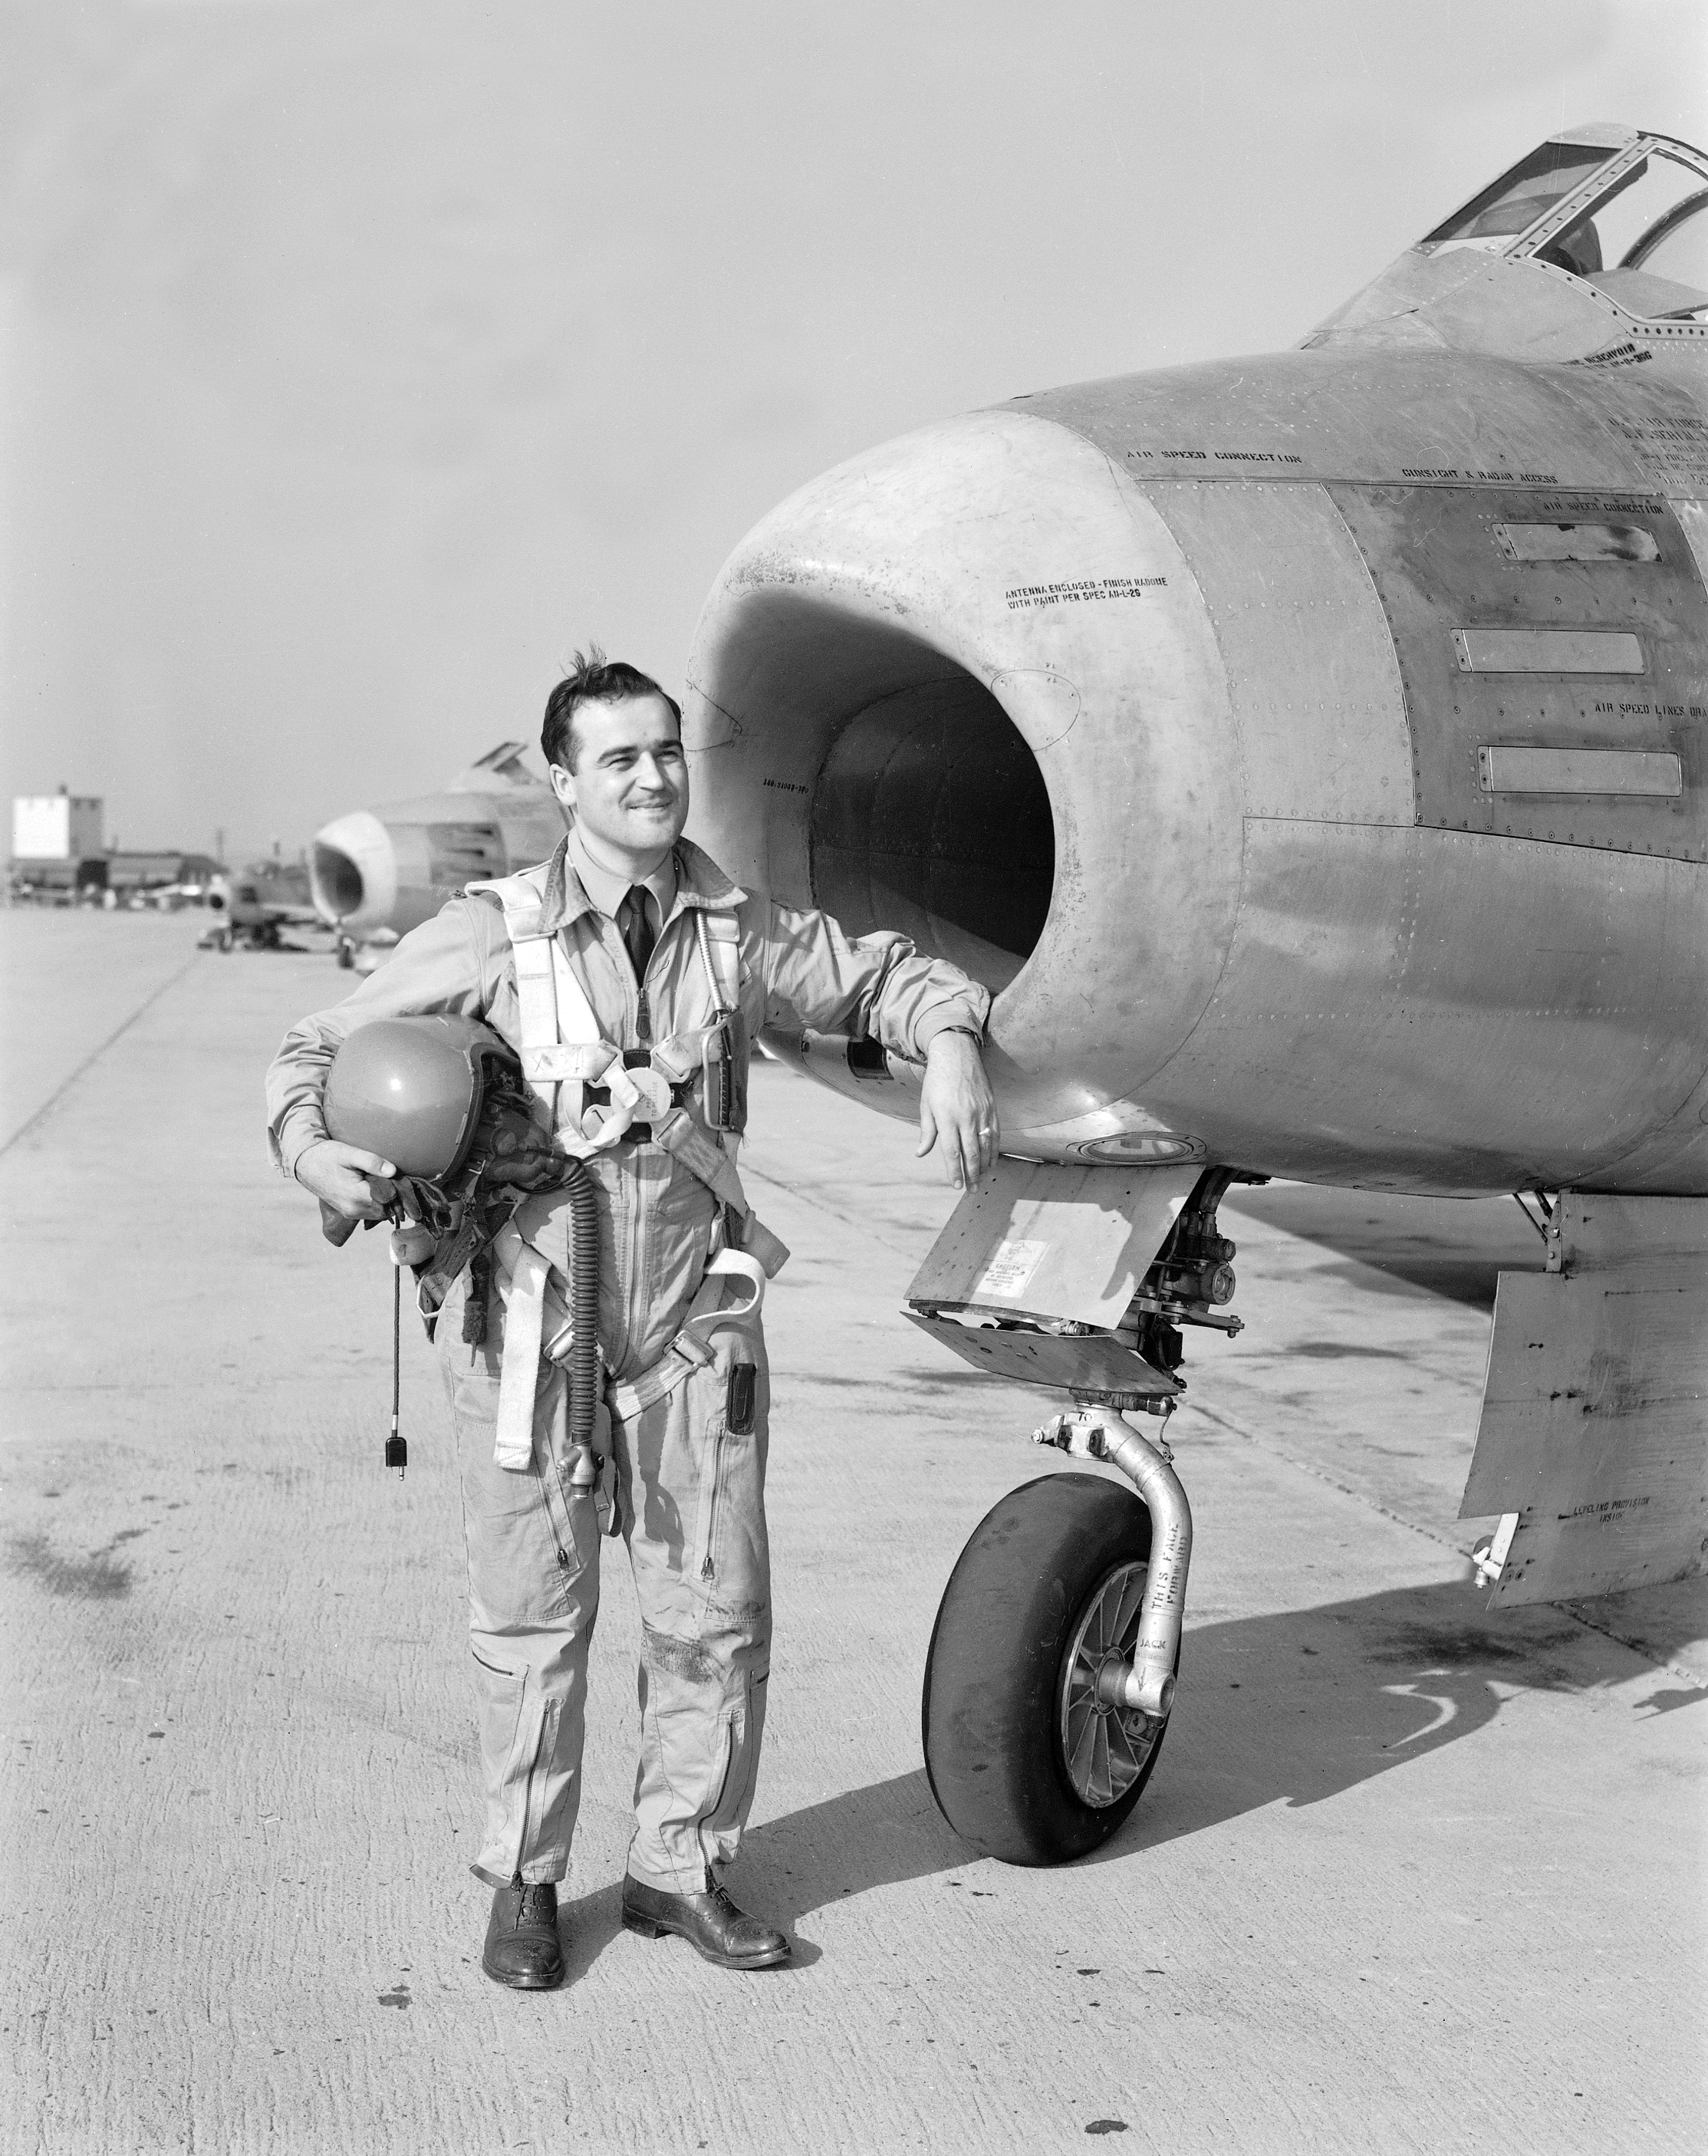 PL-51164 28/02/51 F/L Omer Levesque, Montreal, in front of F-86 at Newcastle County Airport, Delaware. Korea SIP p36